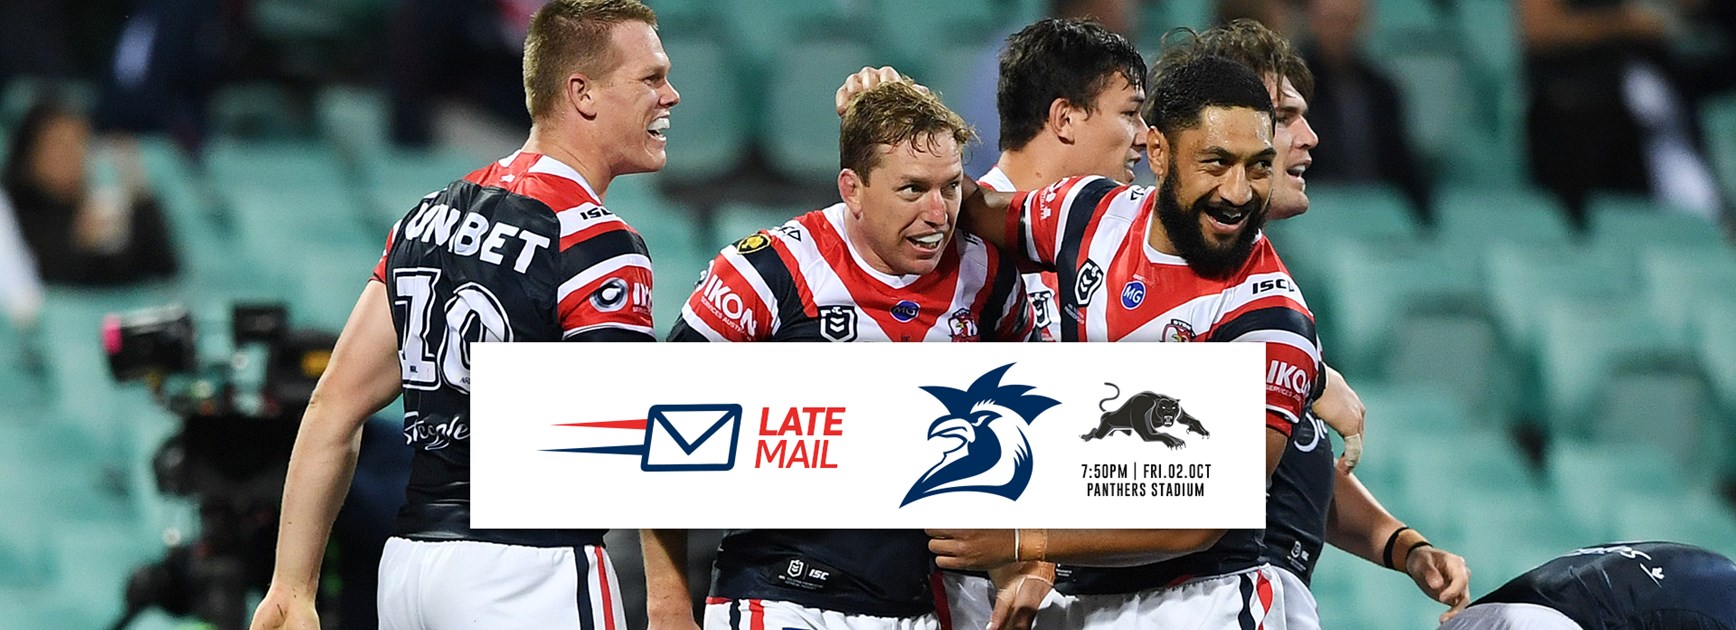 NRL Late Mail | Qualifying Final